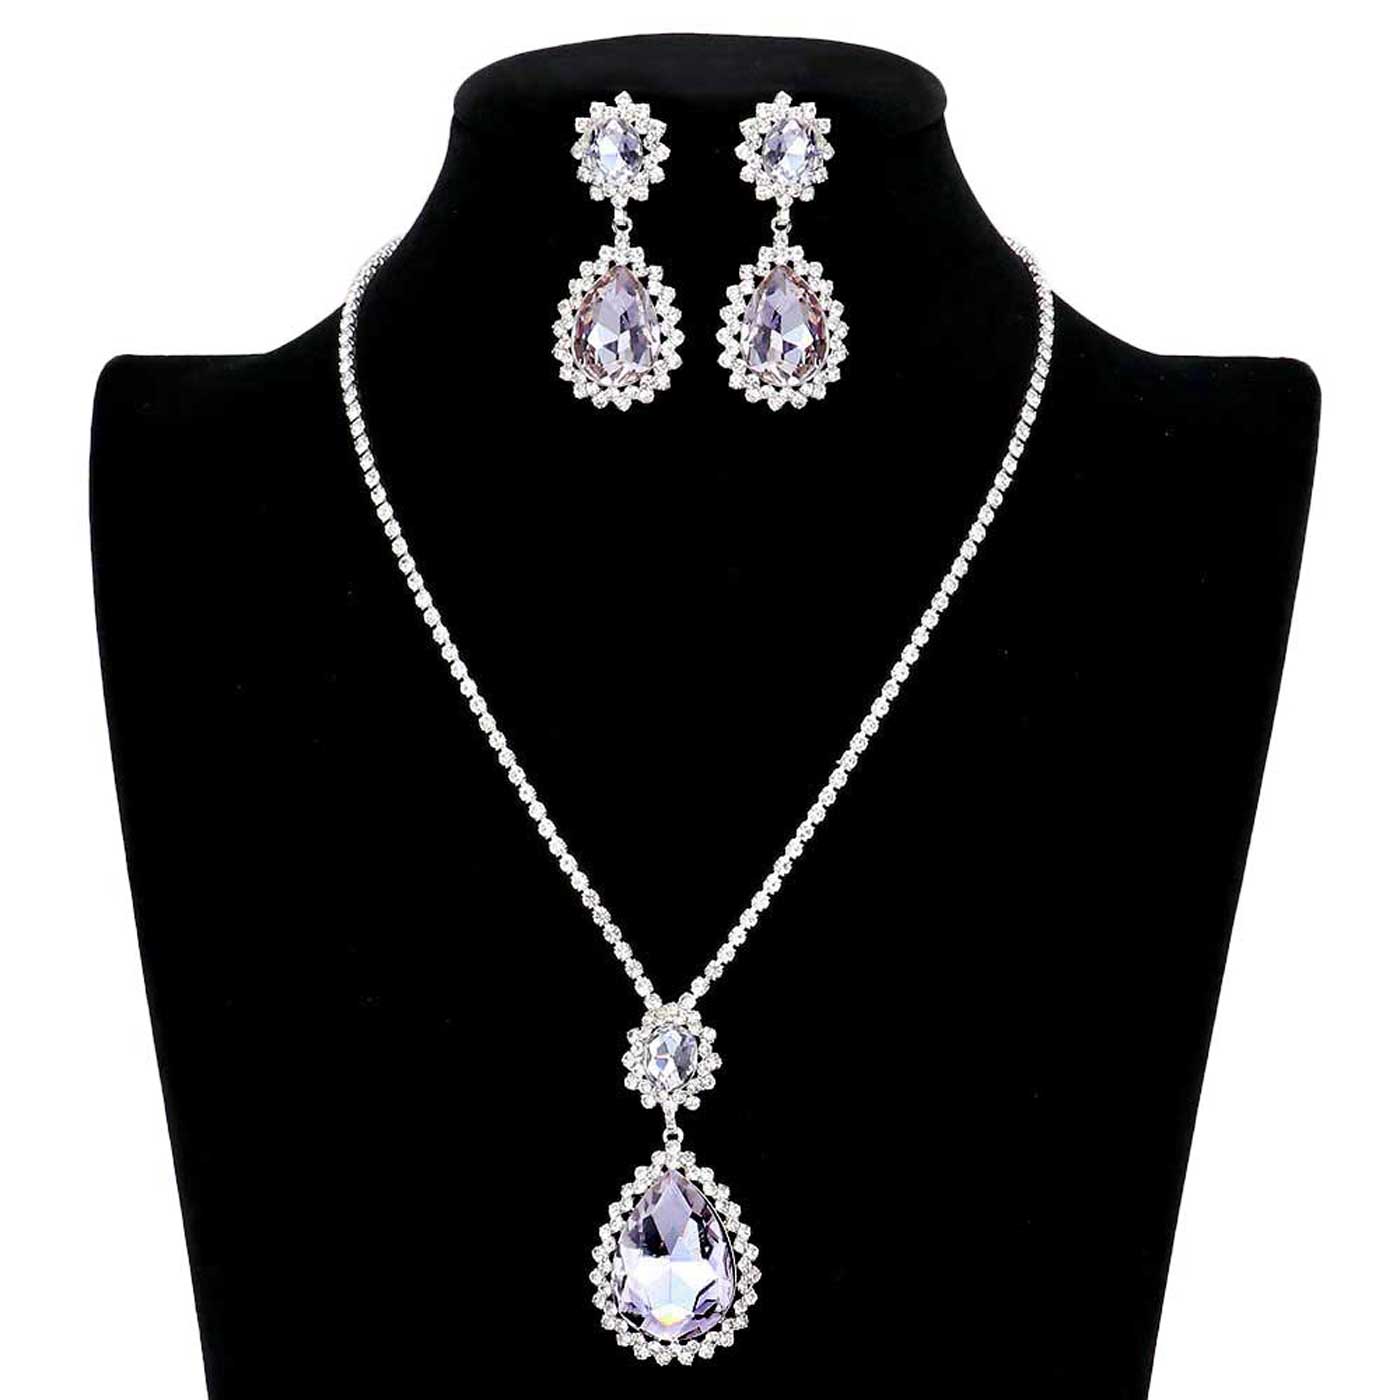 Amethyst Teardrop Accented Rhinestone Necklace. These gorgeous rhinestone pieces will show your class in any special occasion. The elegance of these rhinestone goes unmatched, great for wearing at a party! Perfect jewelry to enhance your look. Awesome gift for birthday, Anniversary, Valentine’s Day or any special occasion.